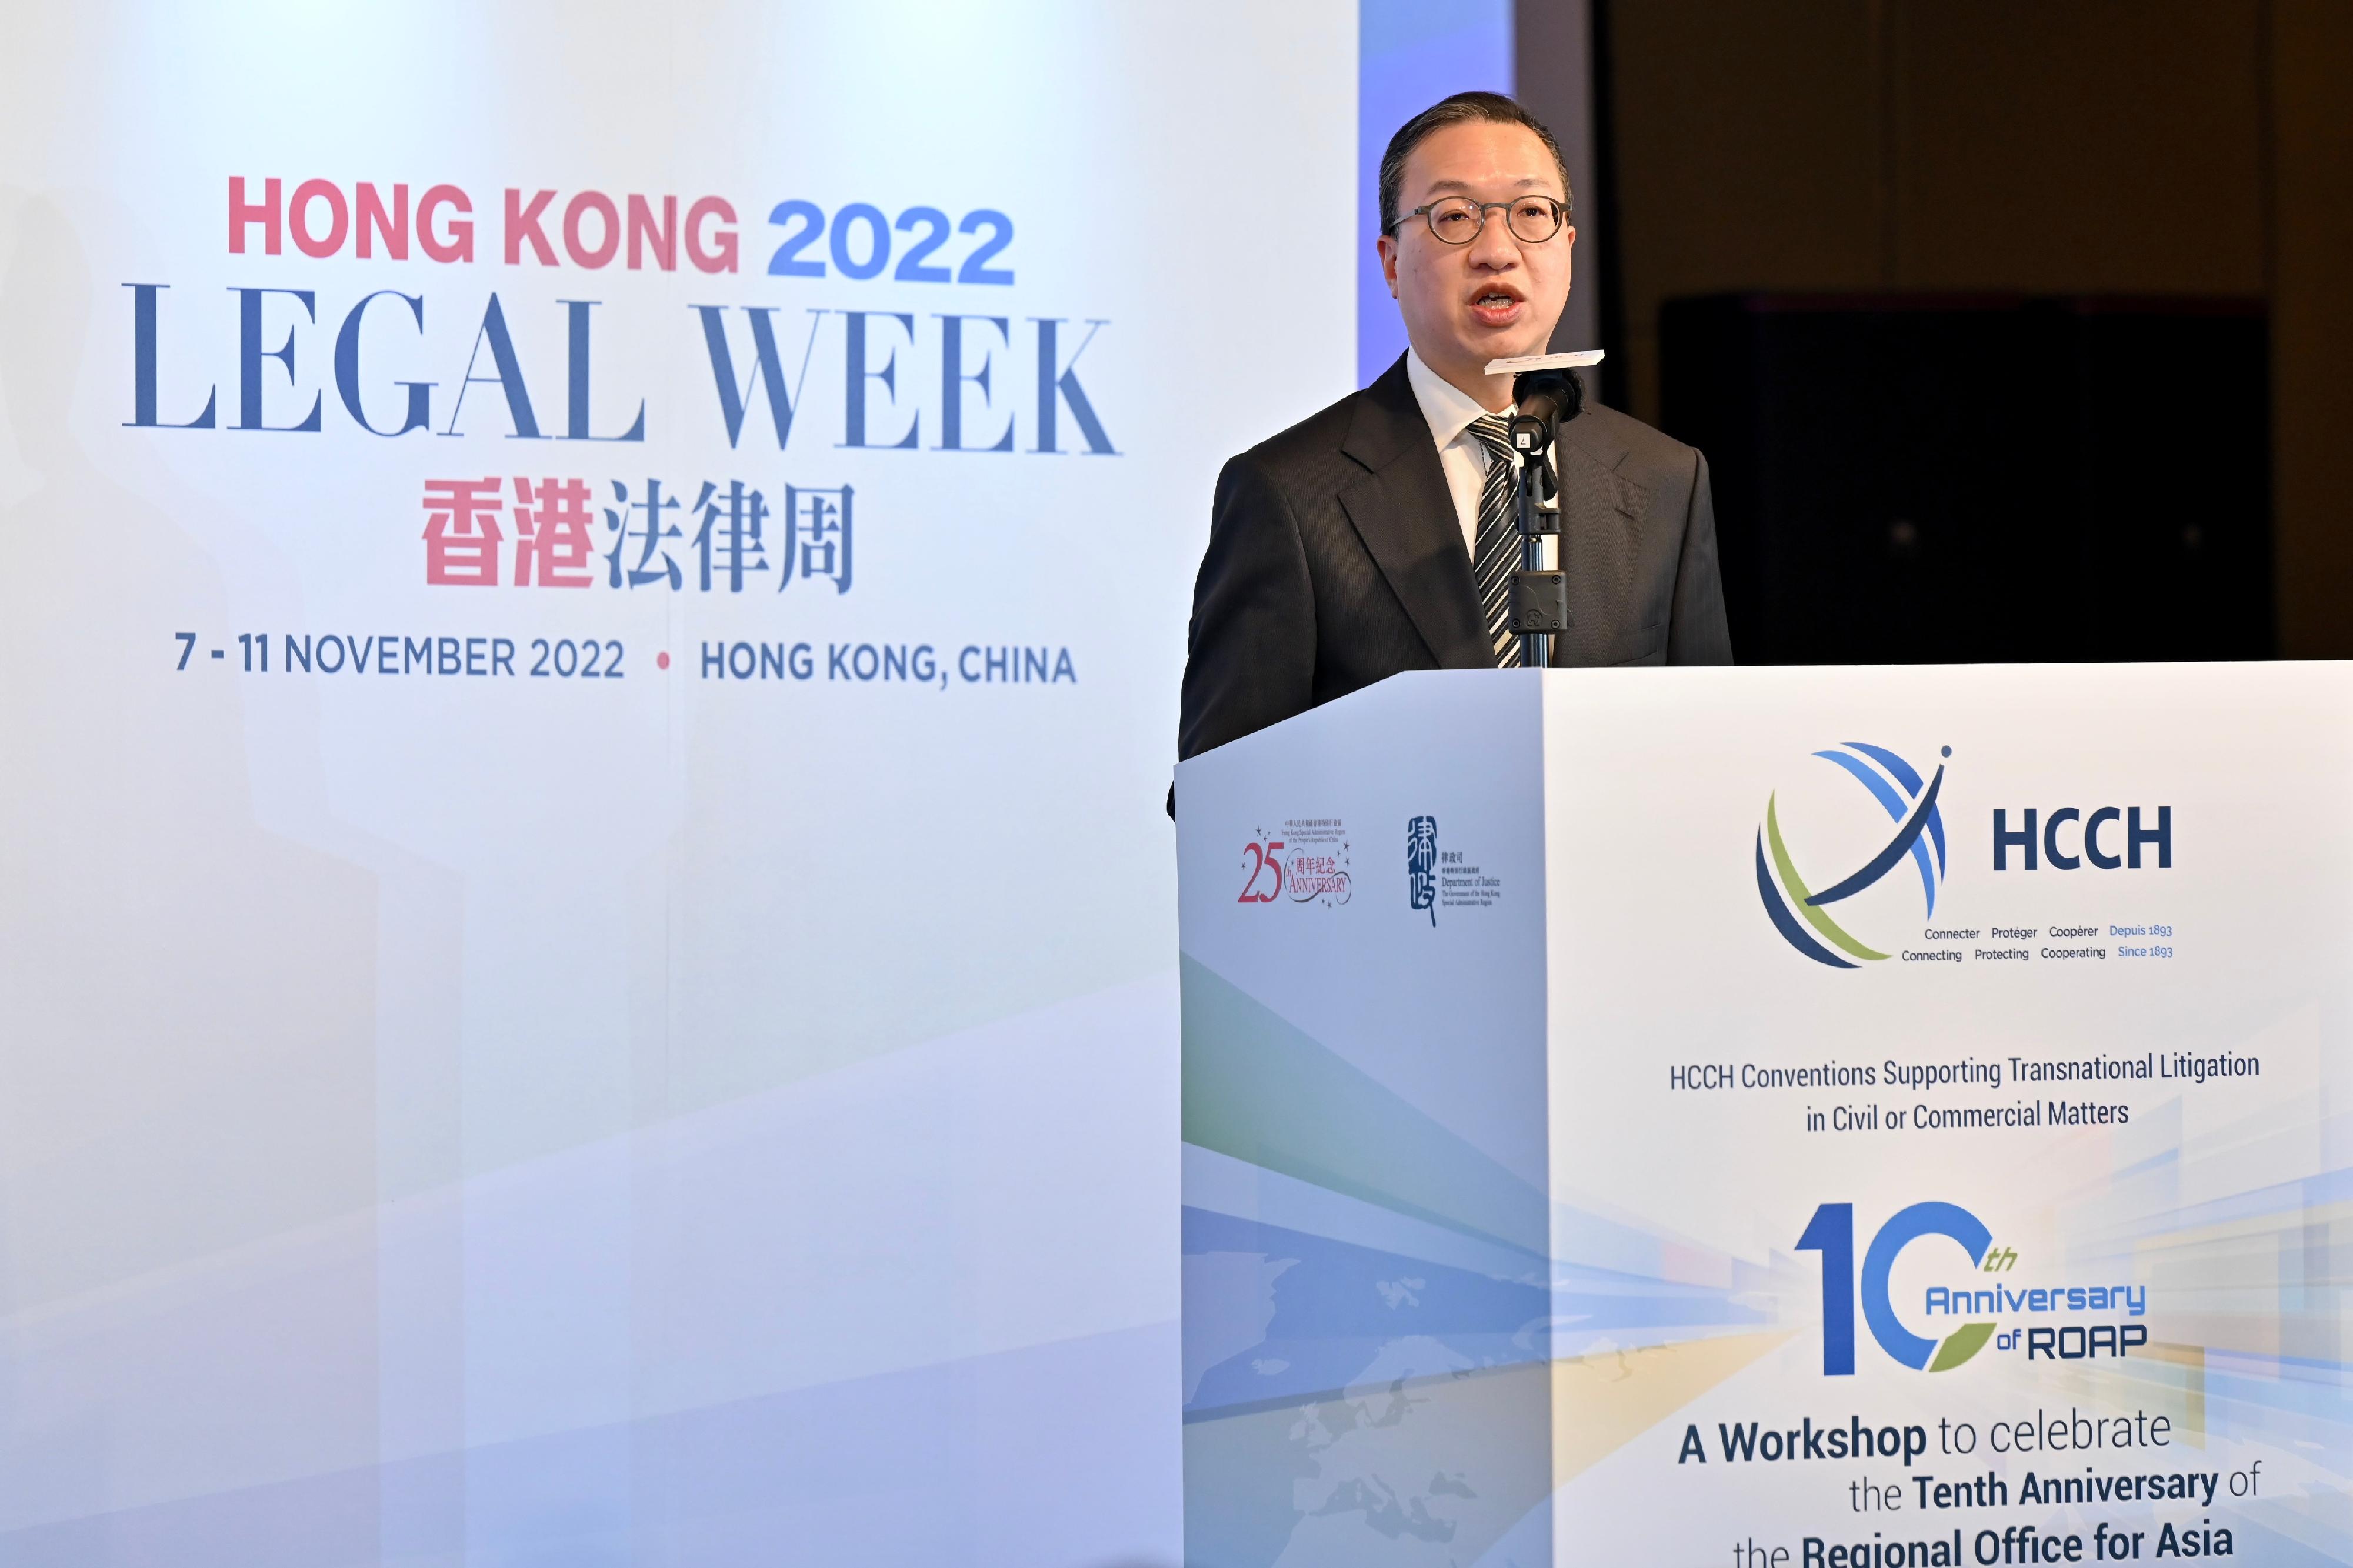 The Secretary for Justice, Mr Paul Lam, SC, speaks at the HCCH Conventions Supporting Transnational Litigation in Civil or Commercial Matters: A Workshop to celebrate the Tenth Anniversary of the Regional Office for Asia and the Pacific under Hong Kong Legal Week 2022 today (November 8).